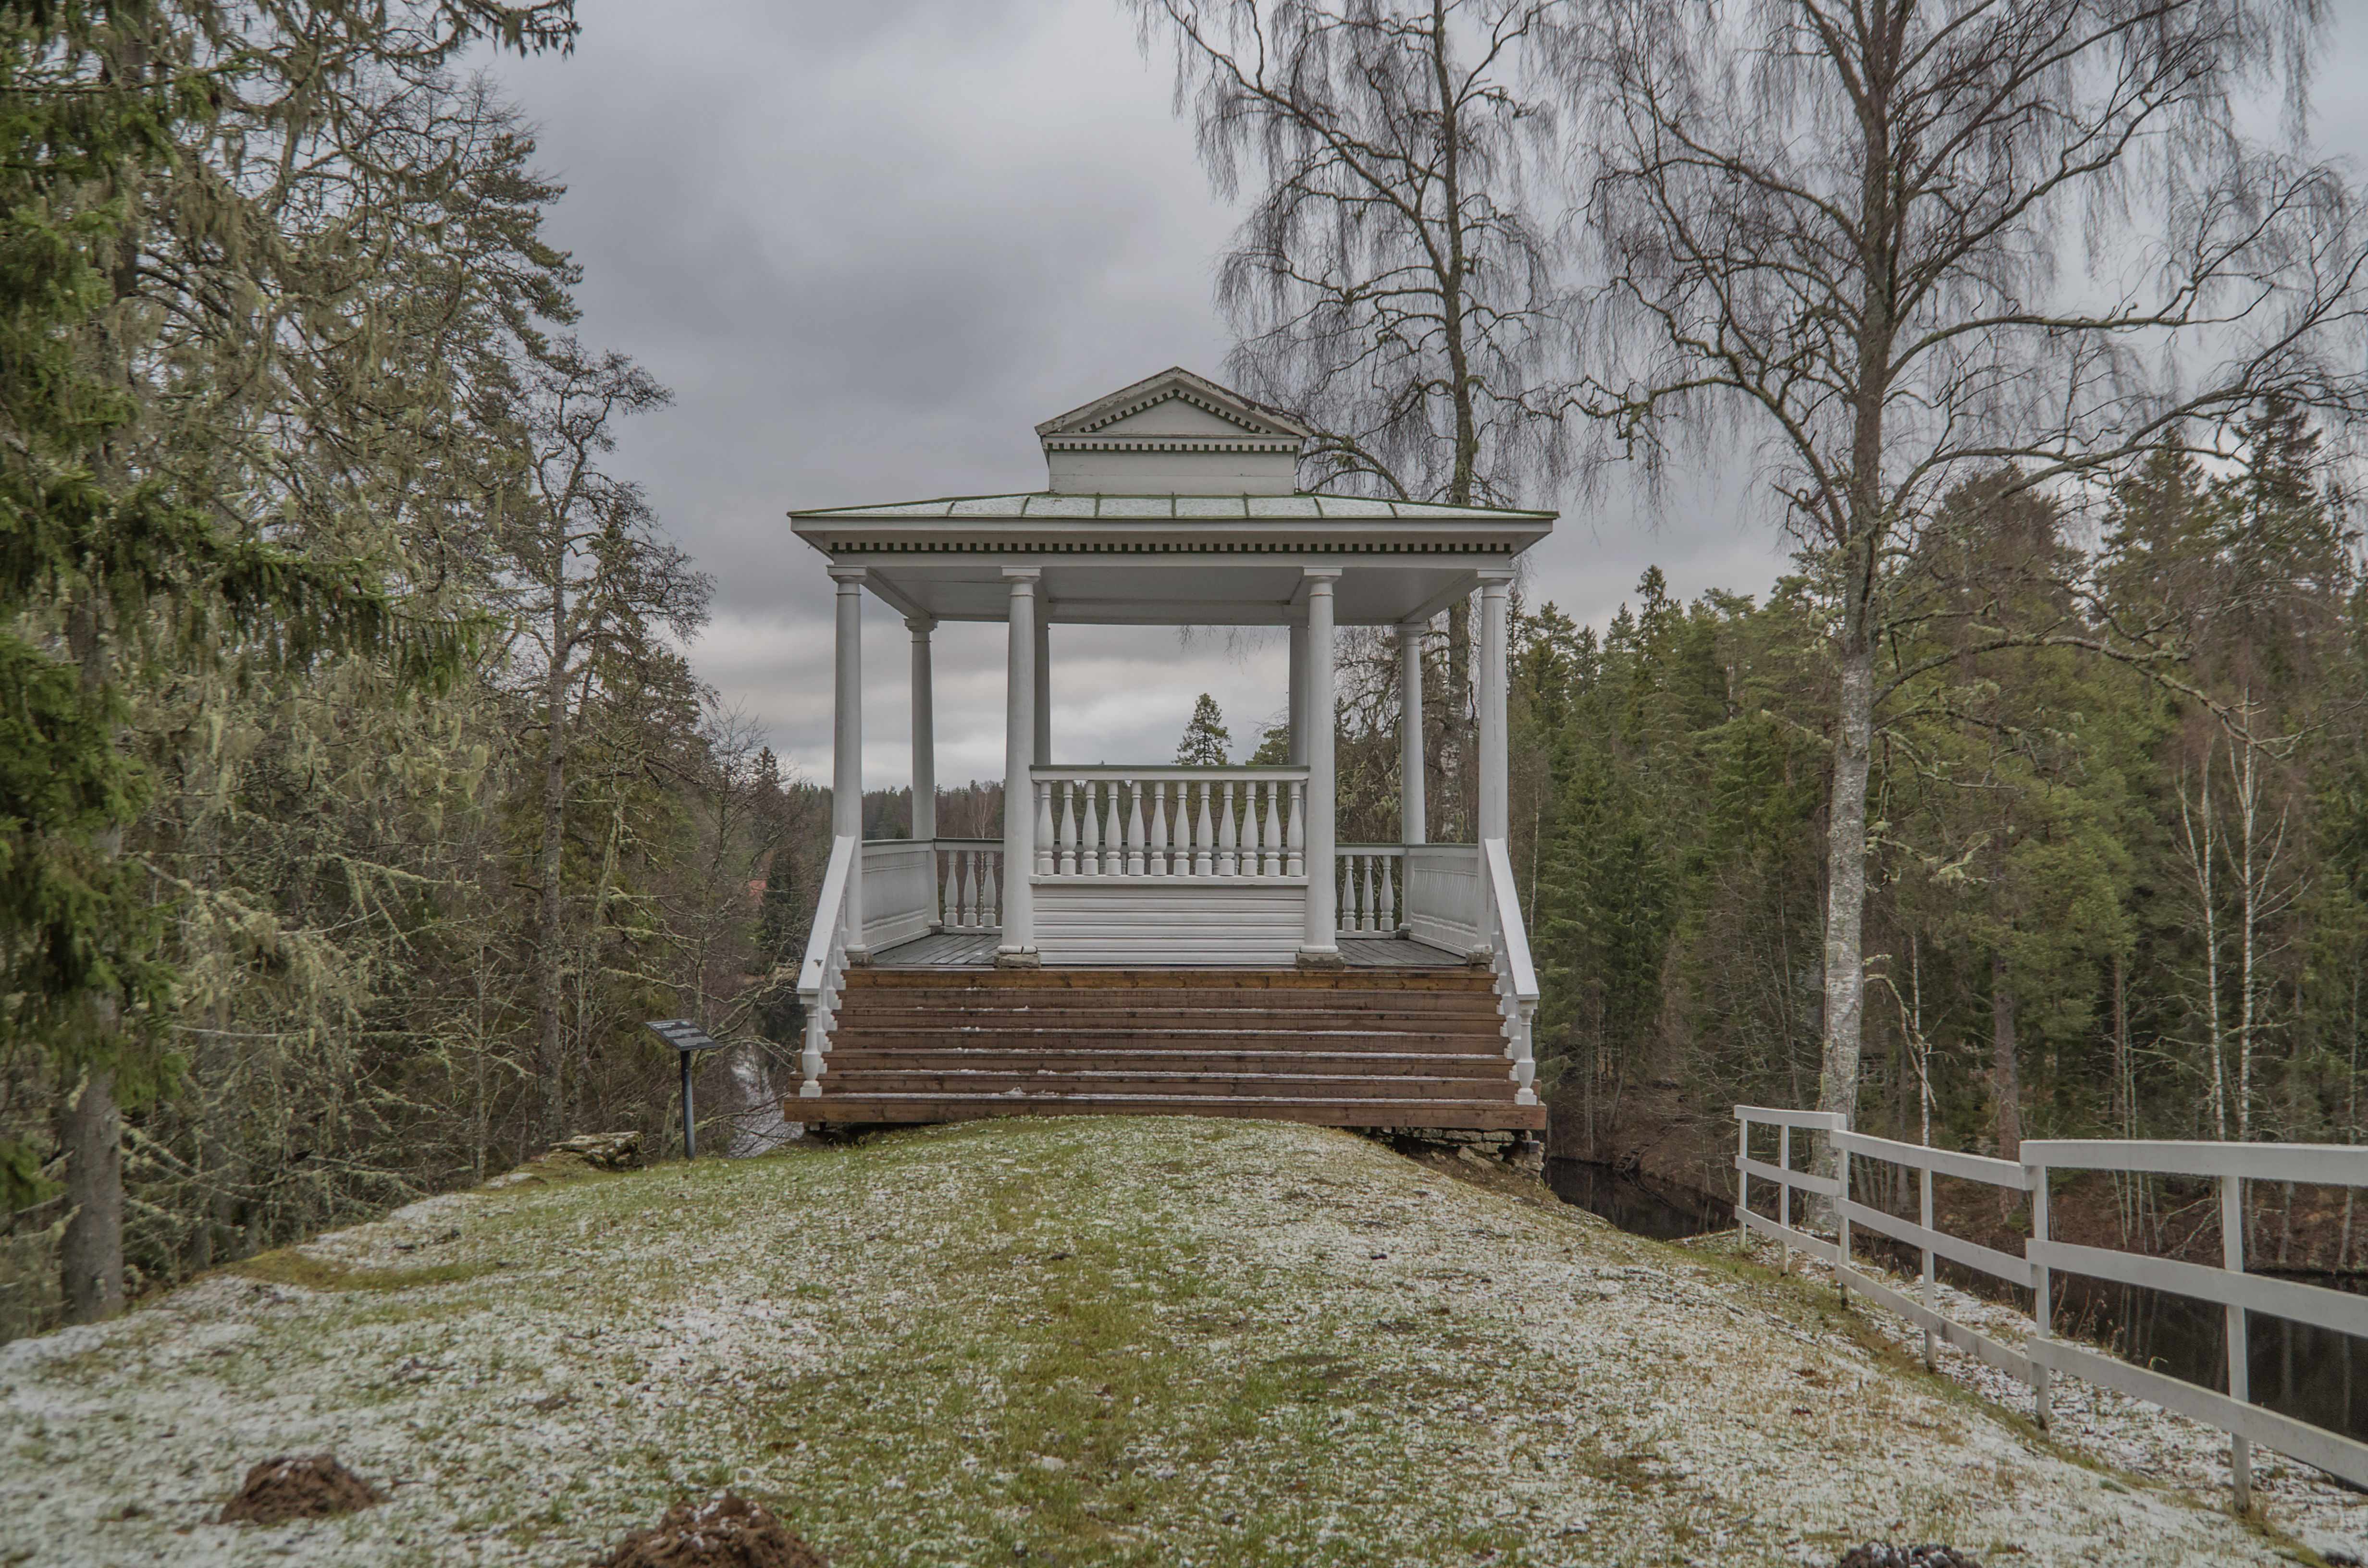 Pavilion “Brest” located on the shore of Oruveski Pais lake in Palmse Manor park rephoto